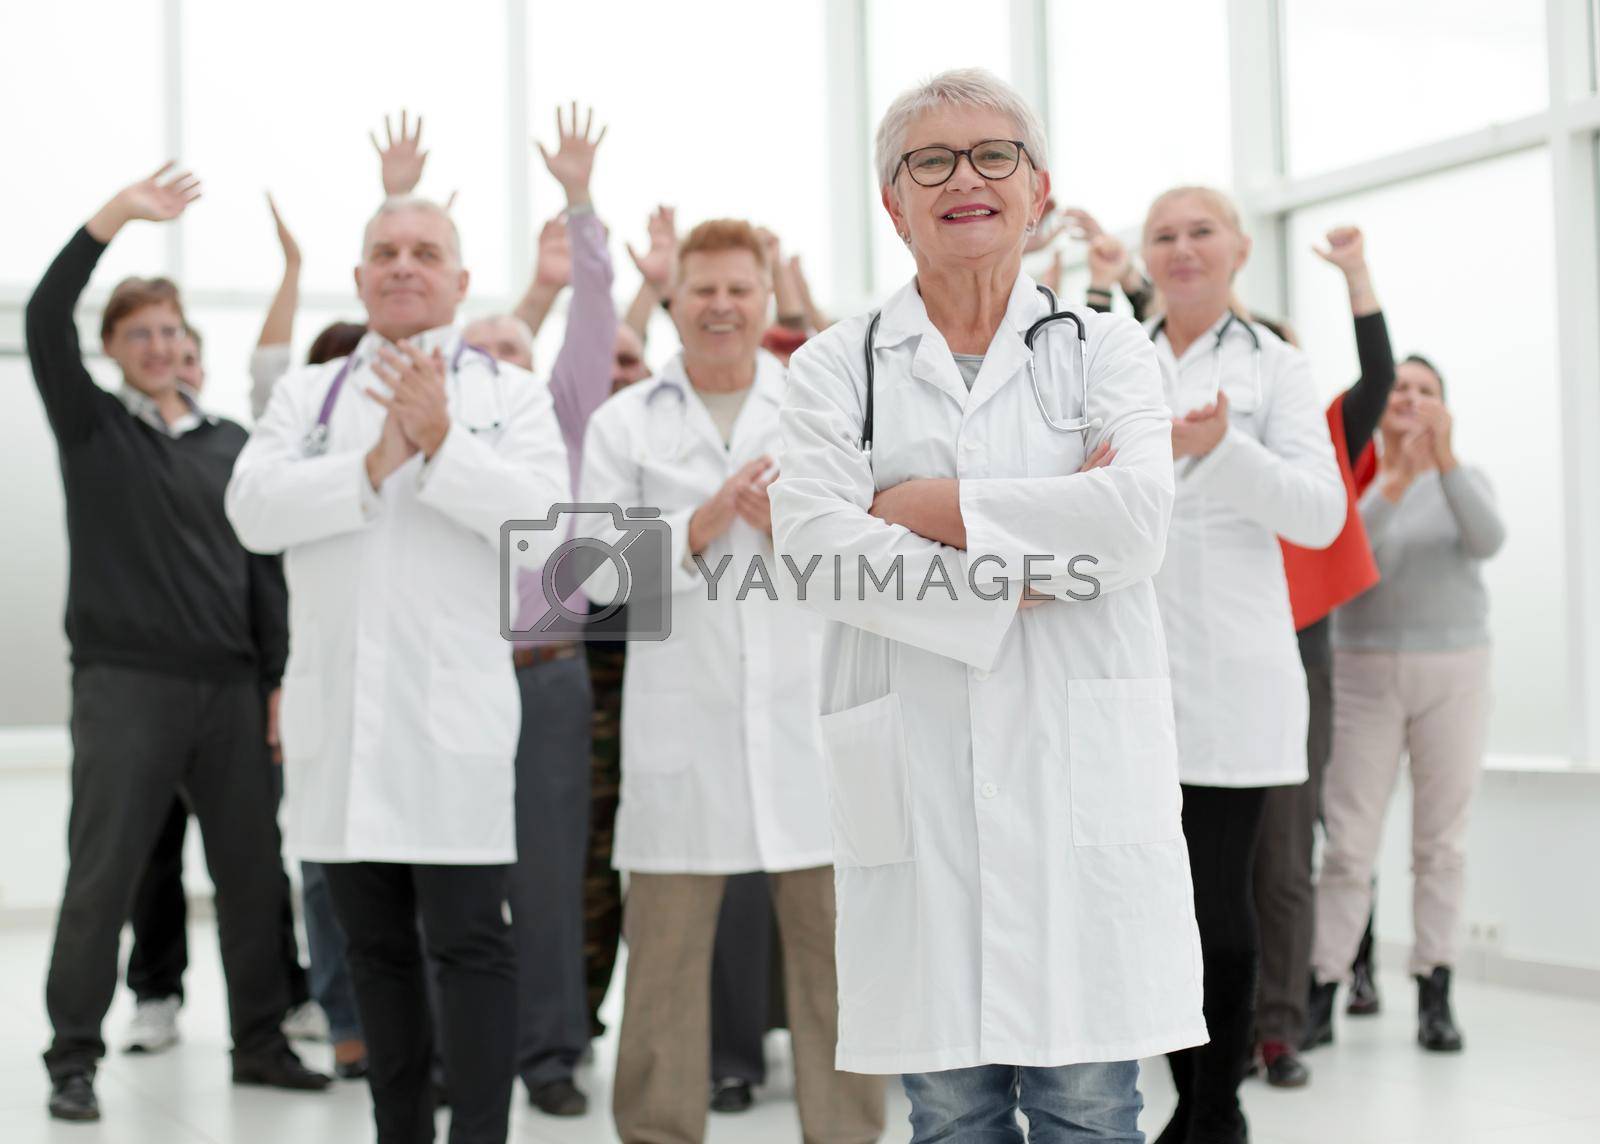 Royalty free image of doctors and patients clap their hands. applaud and enjoy success by asdf